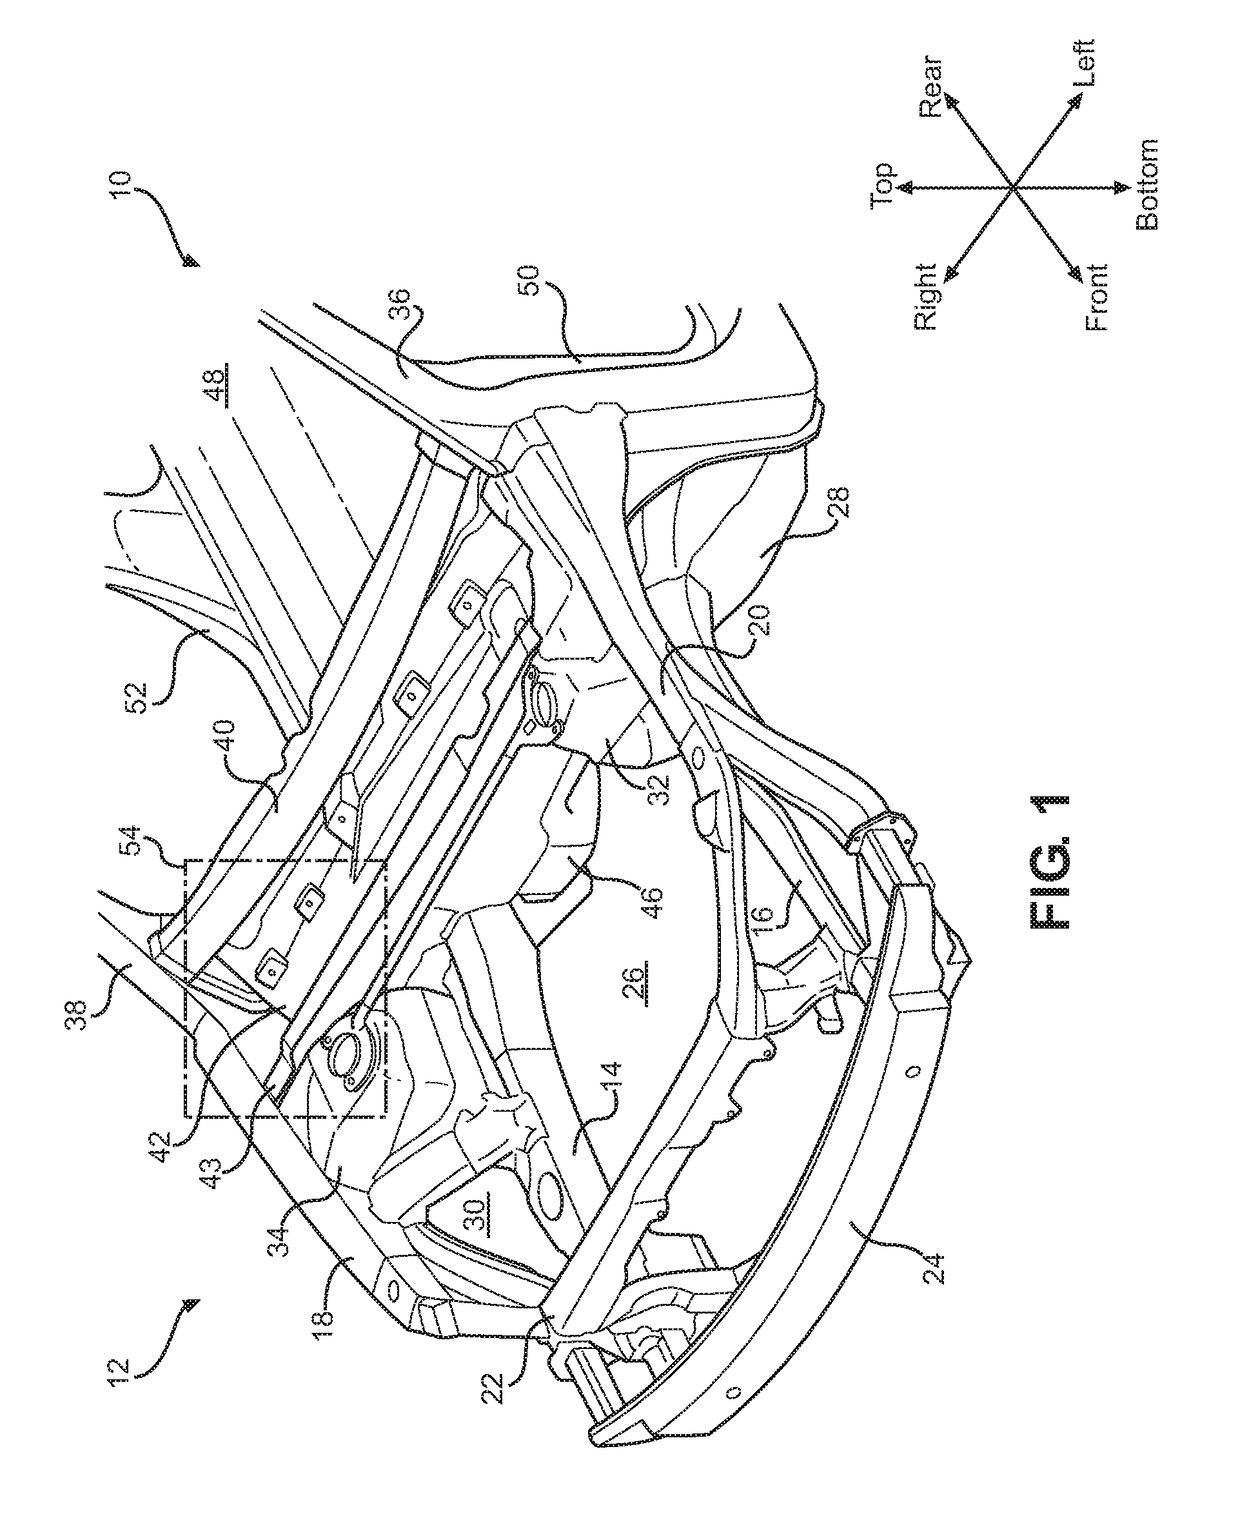 Vehicle air intake apparatus, and methods of use and manufacture thereof